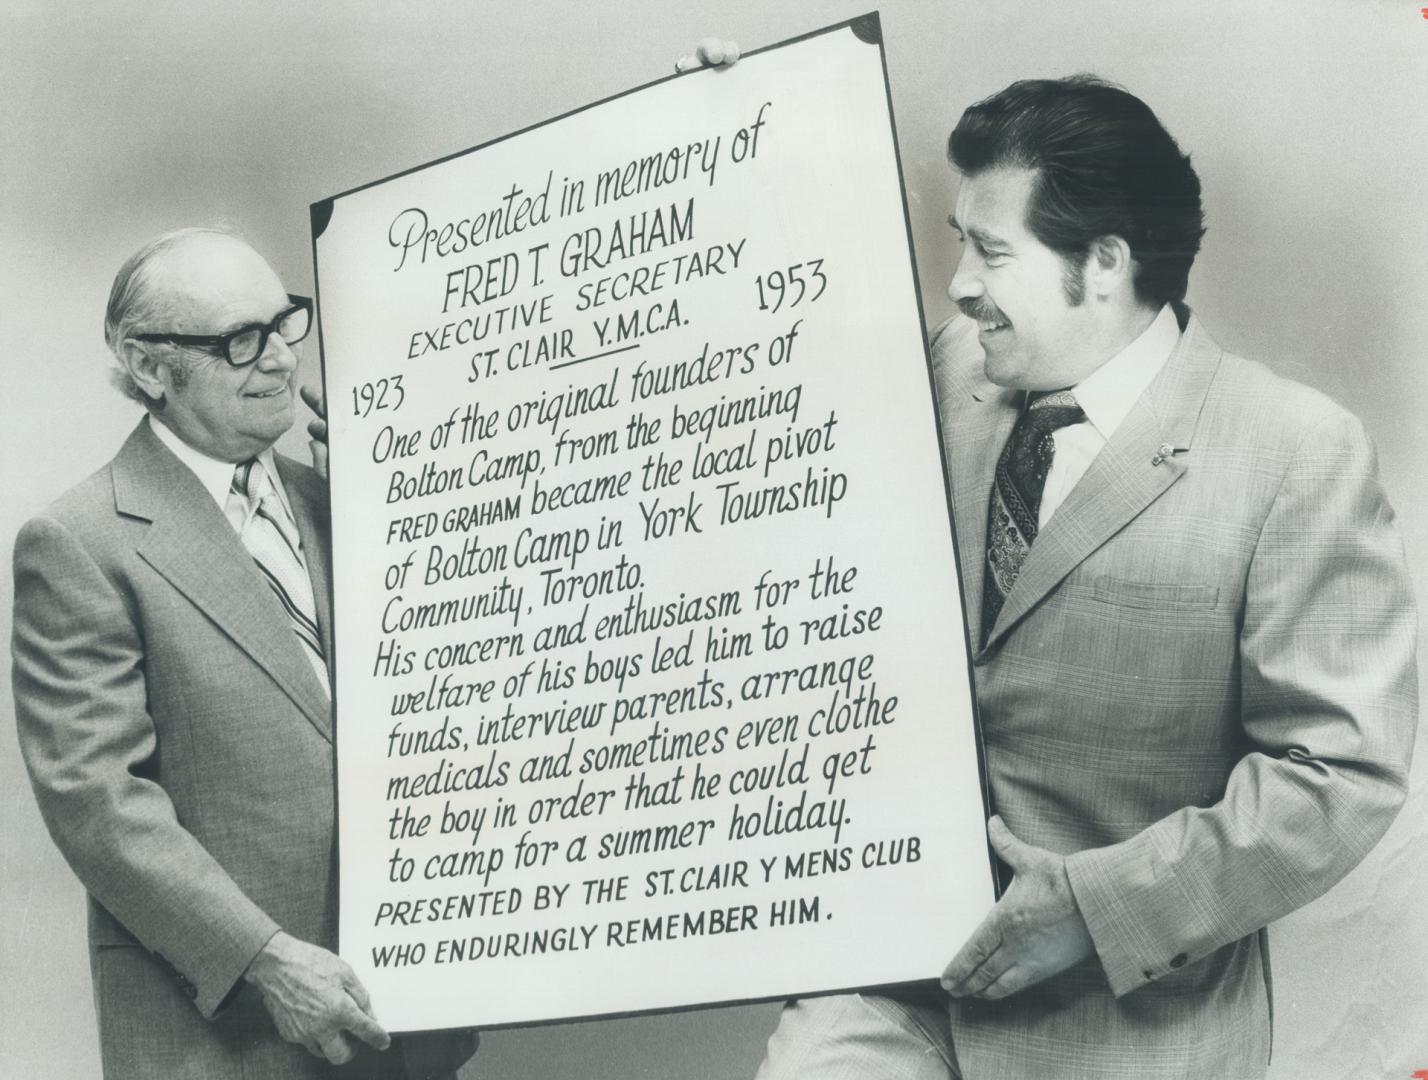 A memorial plaque in honor of Fred Graham, a founder of the United Way's Bolton Camp for small children and their mothers, is held by George Radford, (...)